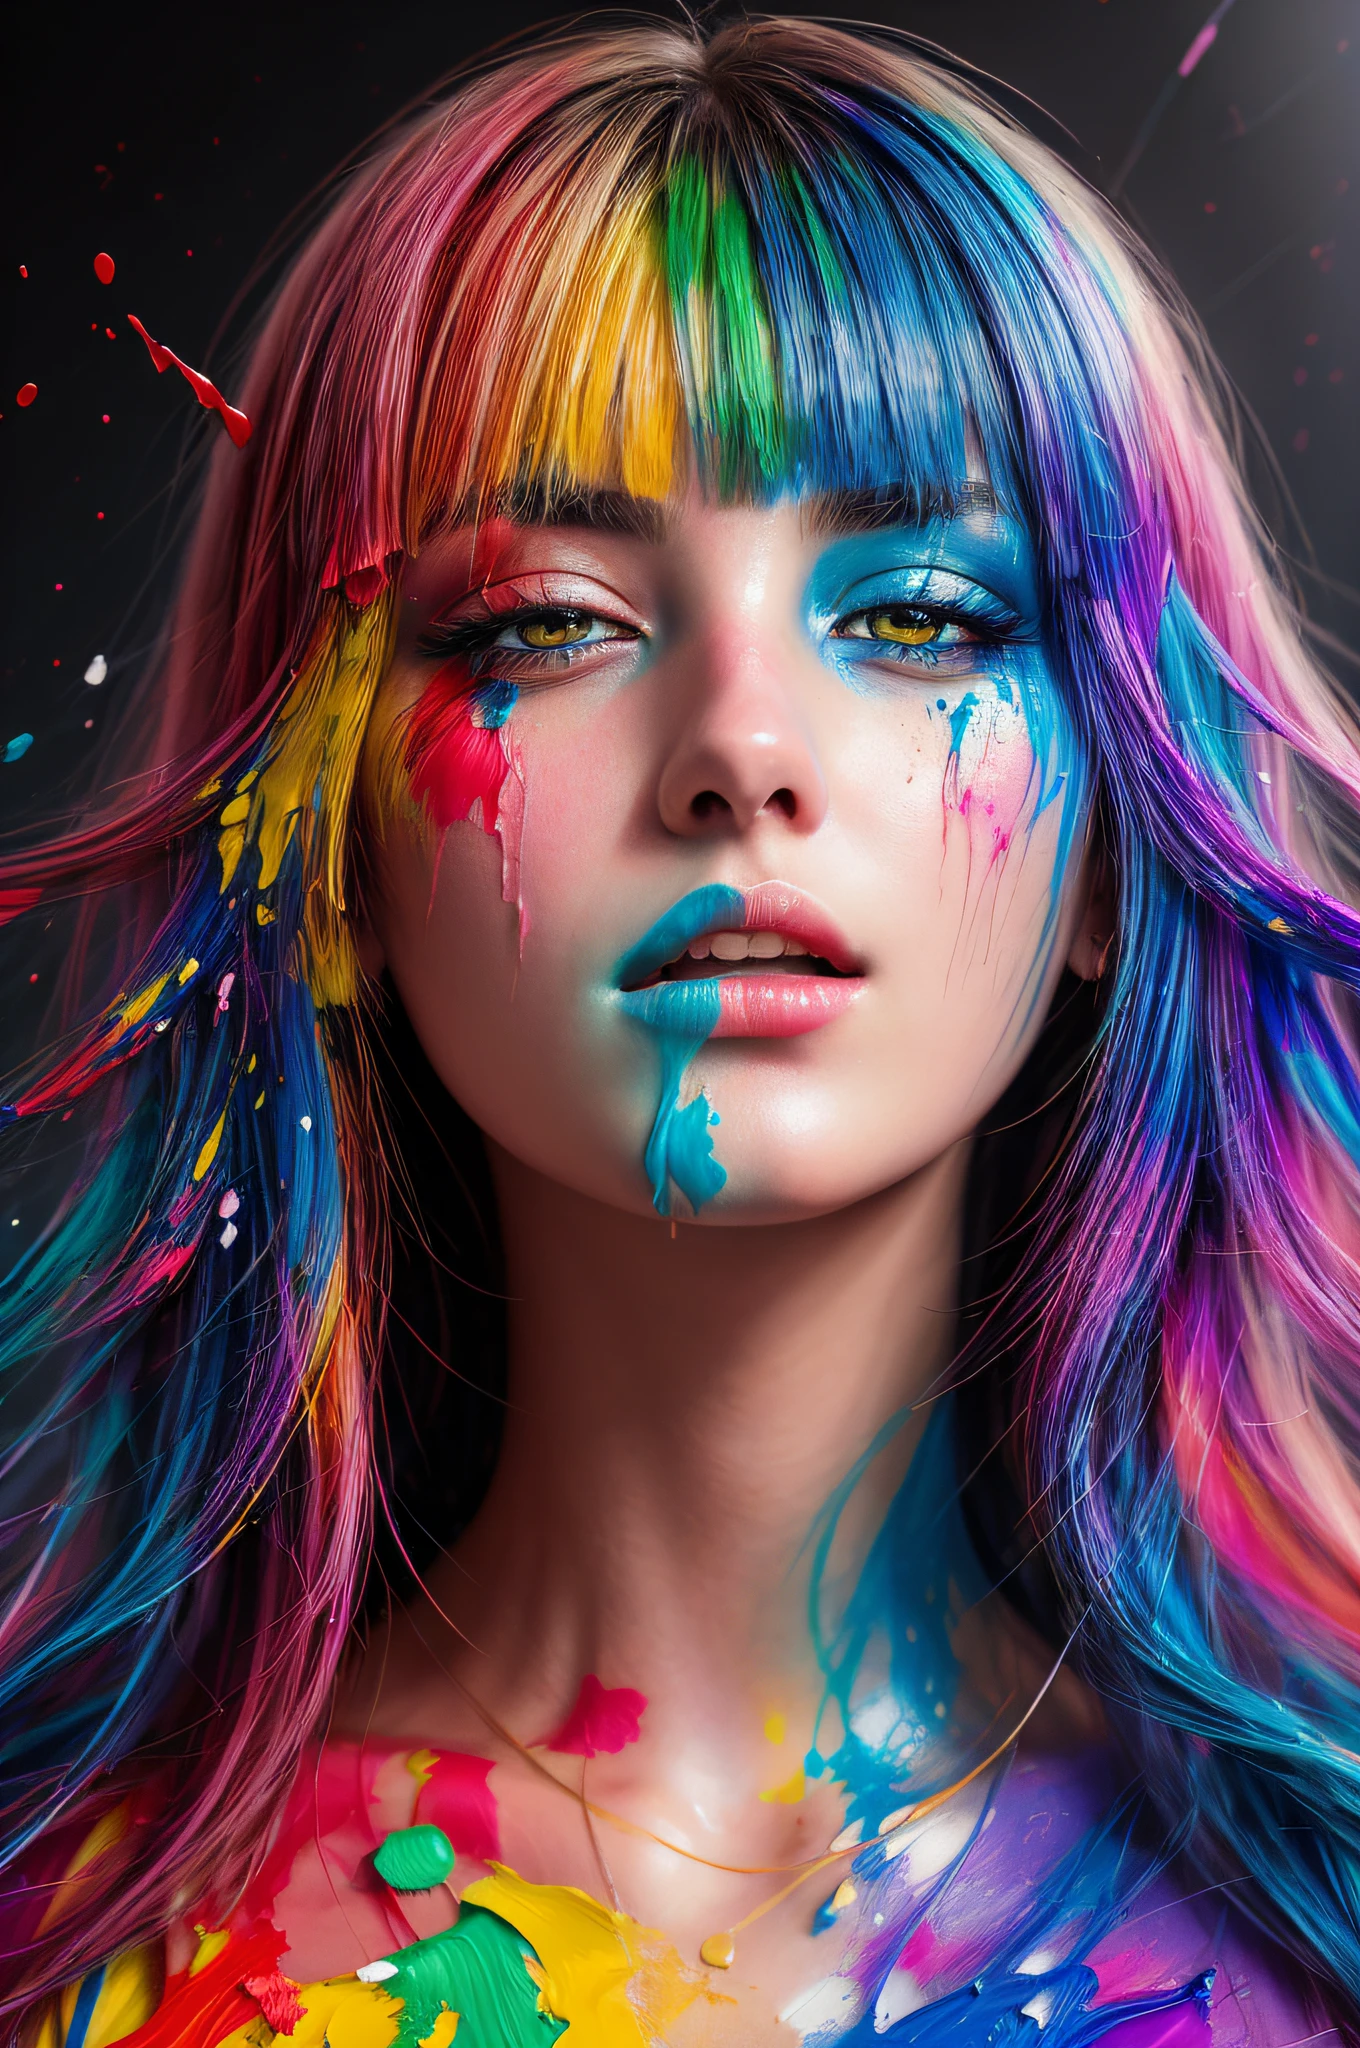 (level difference:1.8),(Paint colliding and splashing on the canvas),(depth of field),1girl's side face blends into it,((side face)),open mouth,(liquid paint rainbow hair:1.1) made of paint and defies gravity,thick flowing,(paint splatter:1.3),Liquid state,stunningly beautiful, masterpiece, detailed background,ultra high quality model, ethereal background,abstract beauty, explosive volumetric, oil painting,heavy strokes,Romantic lighting,Sub-Surface Scatterring,lens 135mm,f1.8,glow,8k,high resolution, dreamy,ray tracing,hdr,god rays,